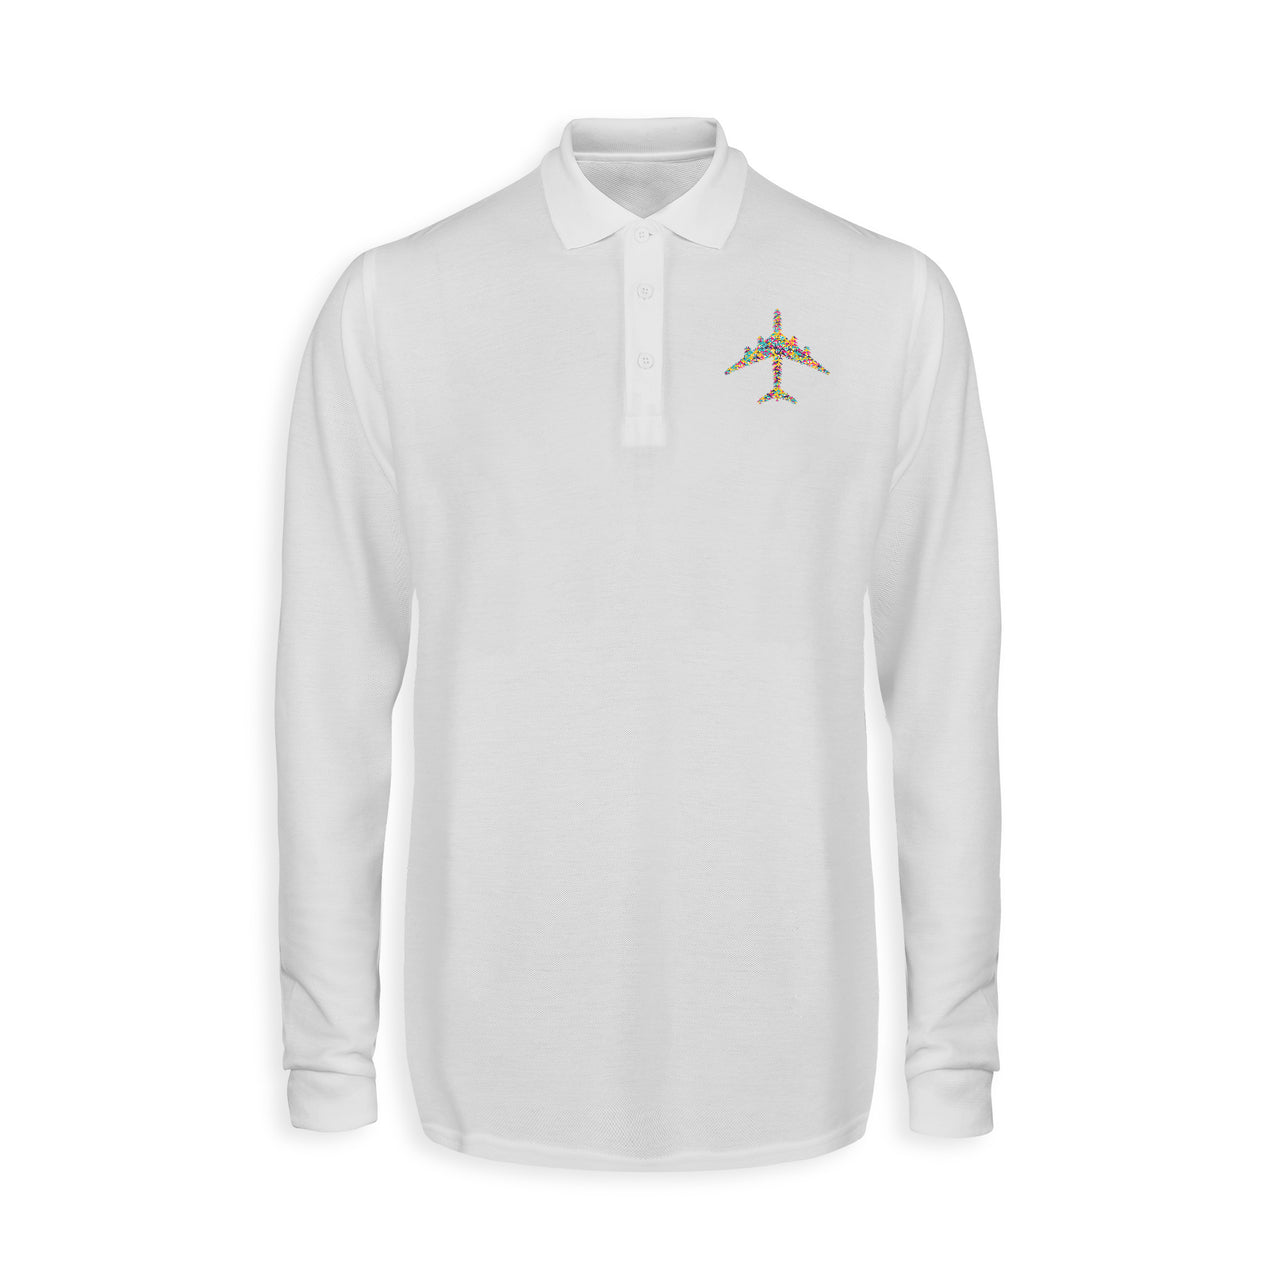 Colourful Airplane Designed Long Sleeve Polo T-Shirts